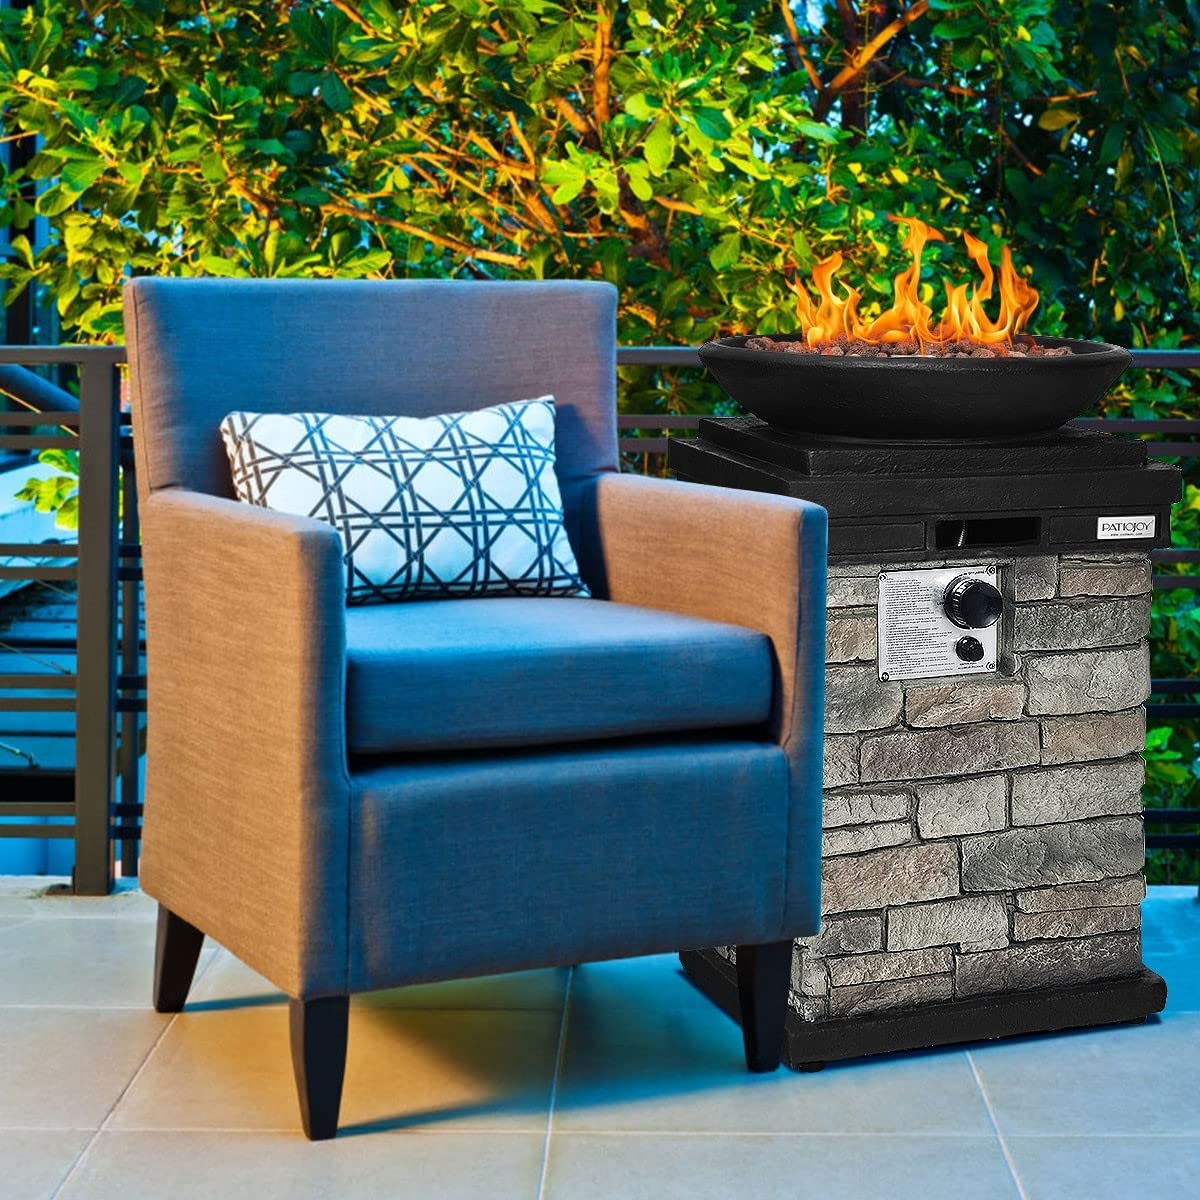 ARLIME Outdoor Propane Burning Fire Bowl, Propane Firebowl Column Realistic Look Firepit Heater, 40,000 BTU Outdoor Gas Fire Pit with Free Lava Rocks, Fits 20lb Tank Inside, Raincover